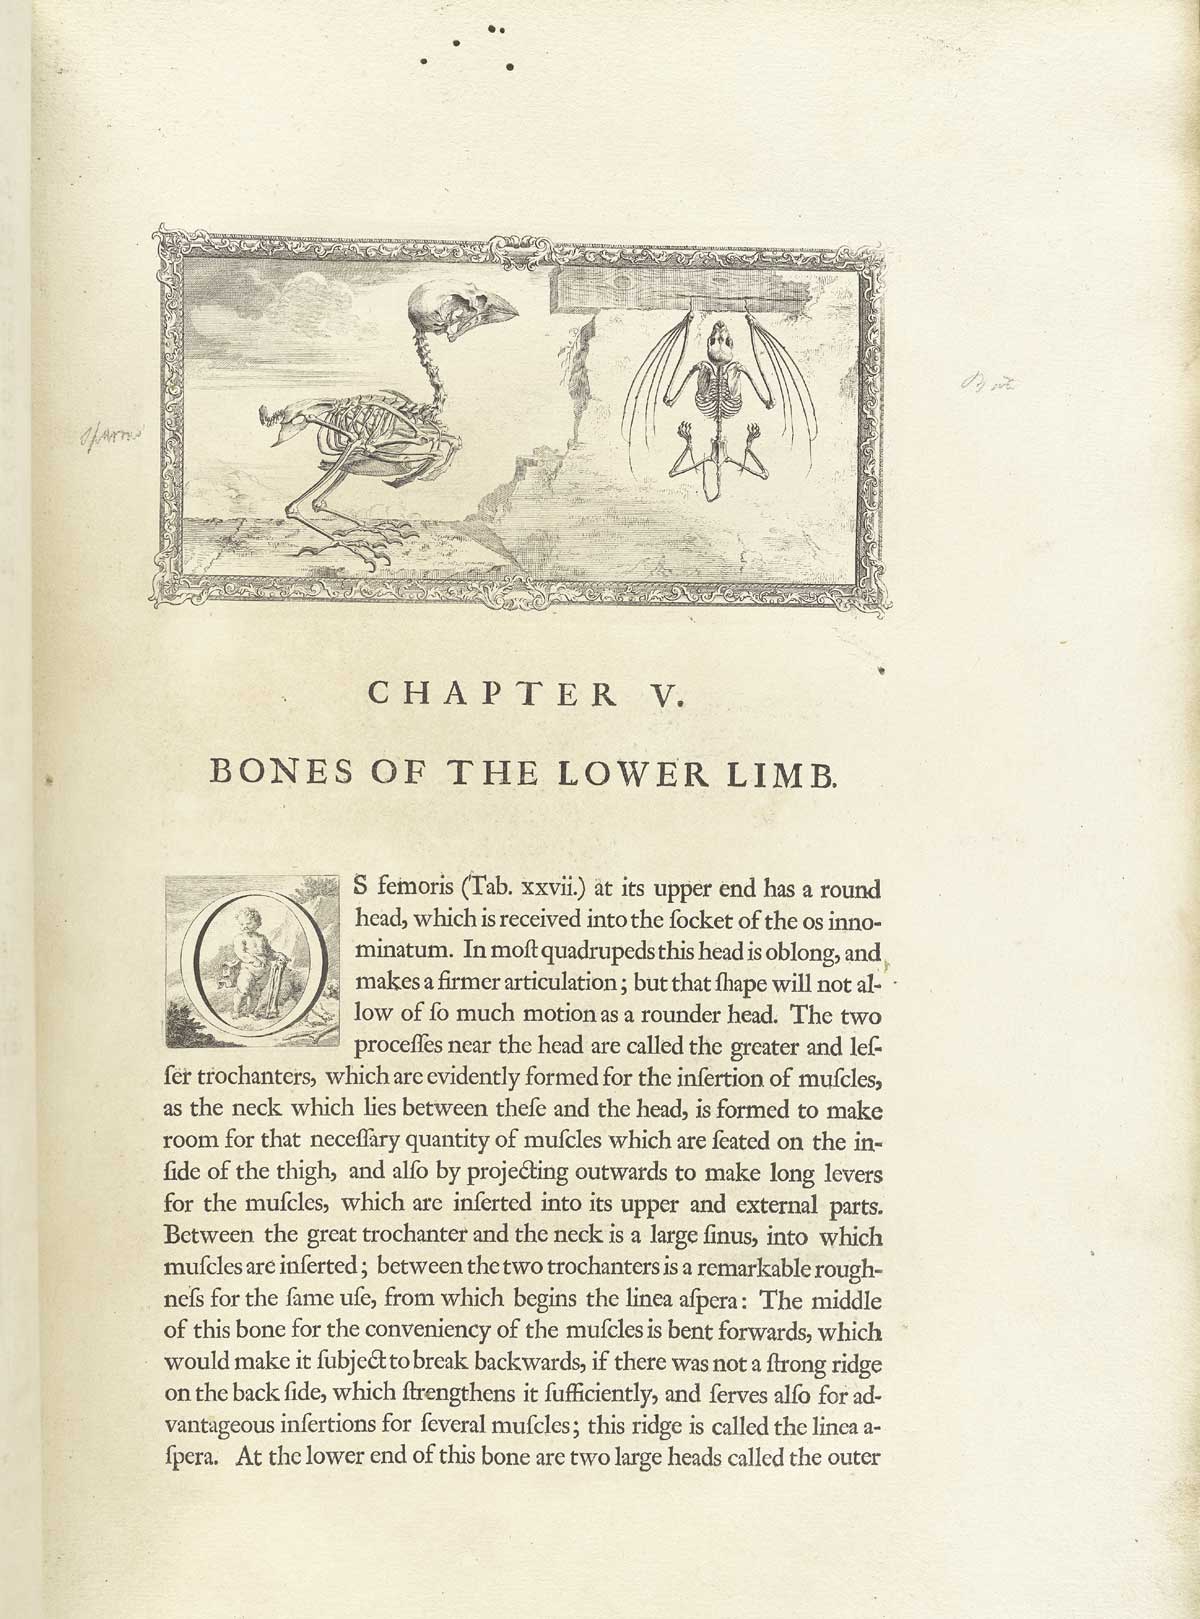 Typeset page of text with large engraved vignette at the top of the page showing the skeletons of a sparrow and a bat, with the sparrow on the left looking at the bat on the right; the bat is hanging down from a wooden beam with his “fingers”, from William Cheselden’s Osteographia, NLM Call no.: WZ 260 C499o 1733.